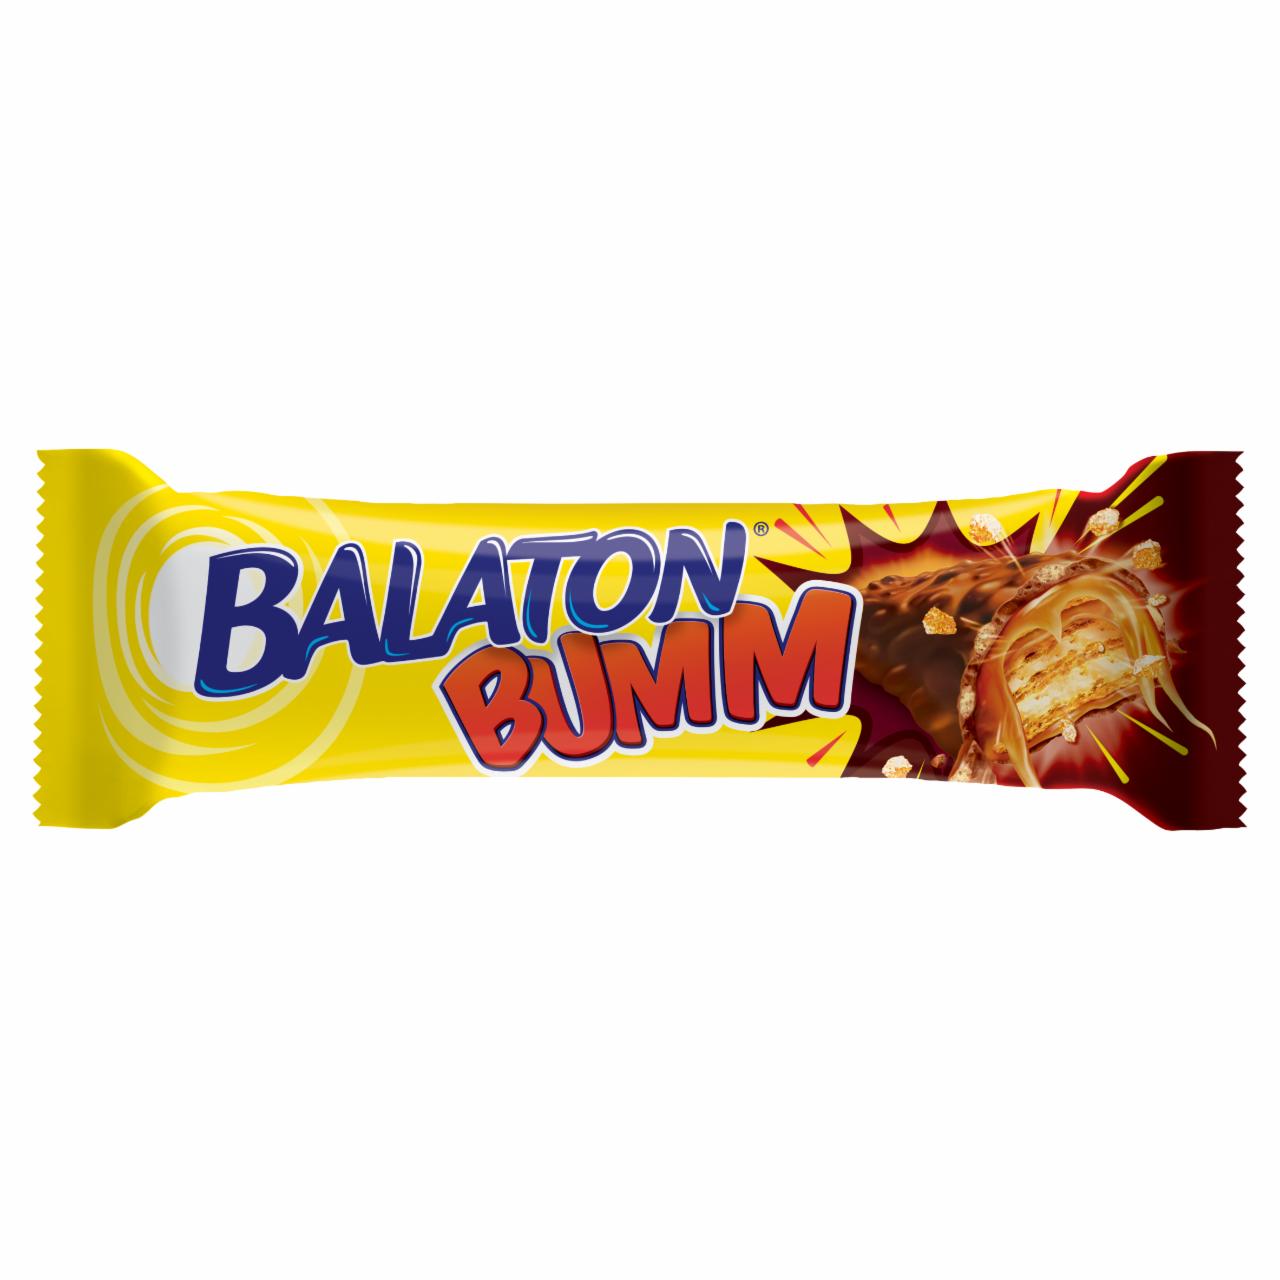 Photo - Balaton Bumm Wafer Bar with Cocoa Milk Coating, Filled with Caramel and Wheat Flakes 42 g